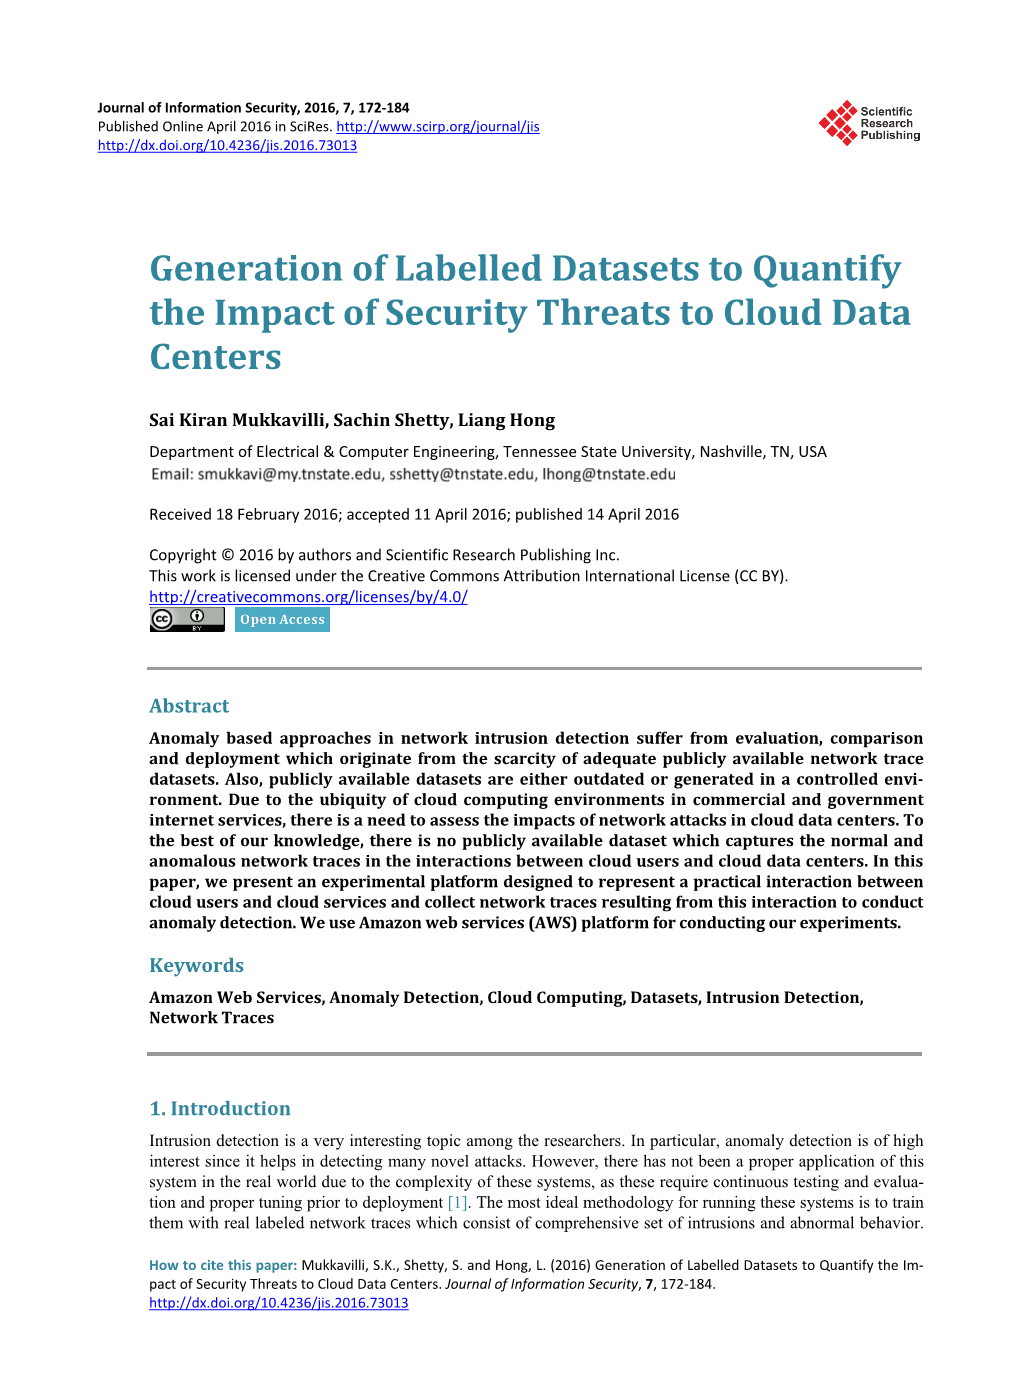 Generation of Labelled Datasets to Quantify the Impact of Security Threats to Cloud Data Centers